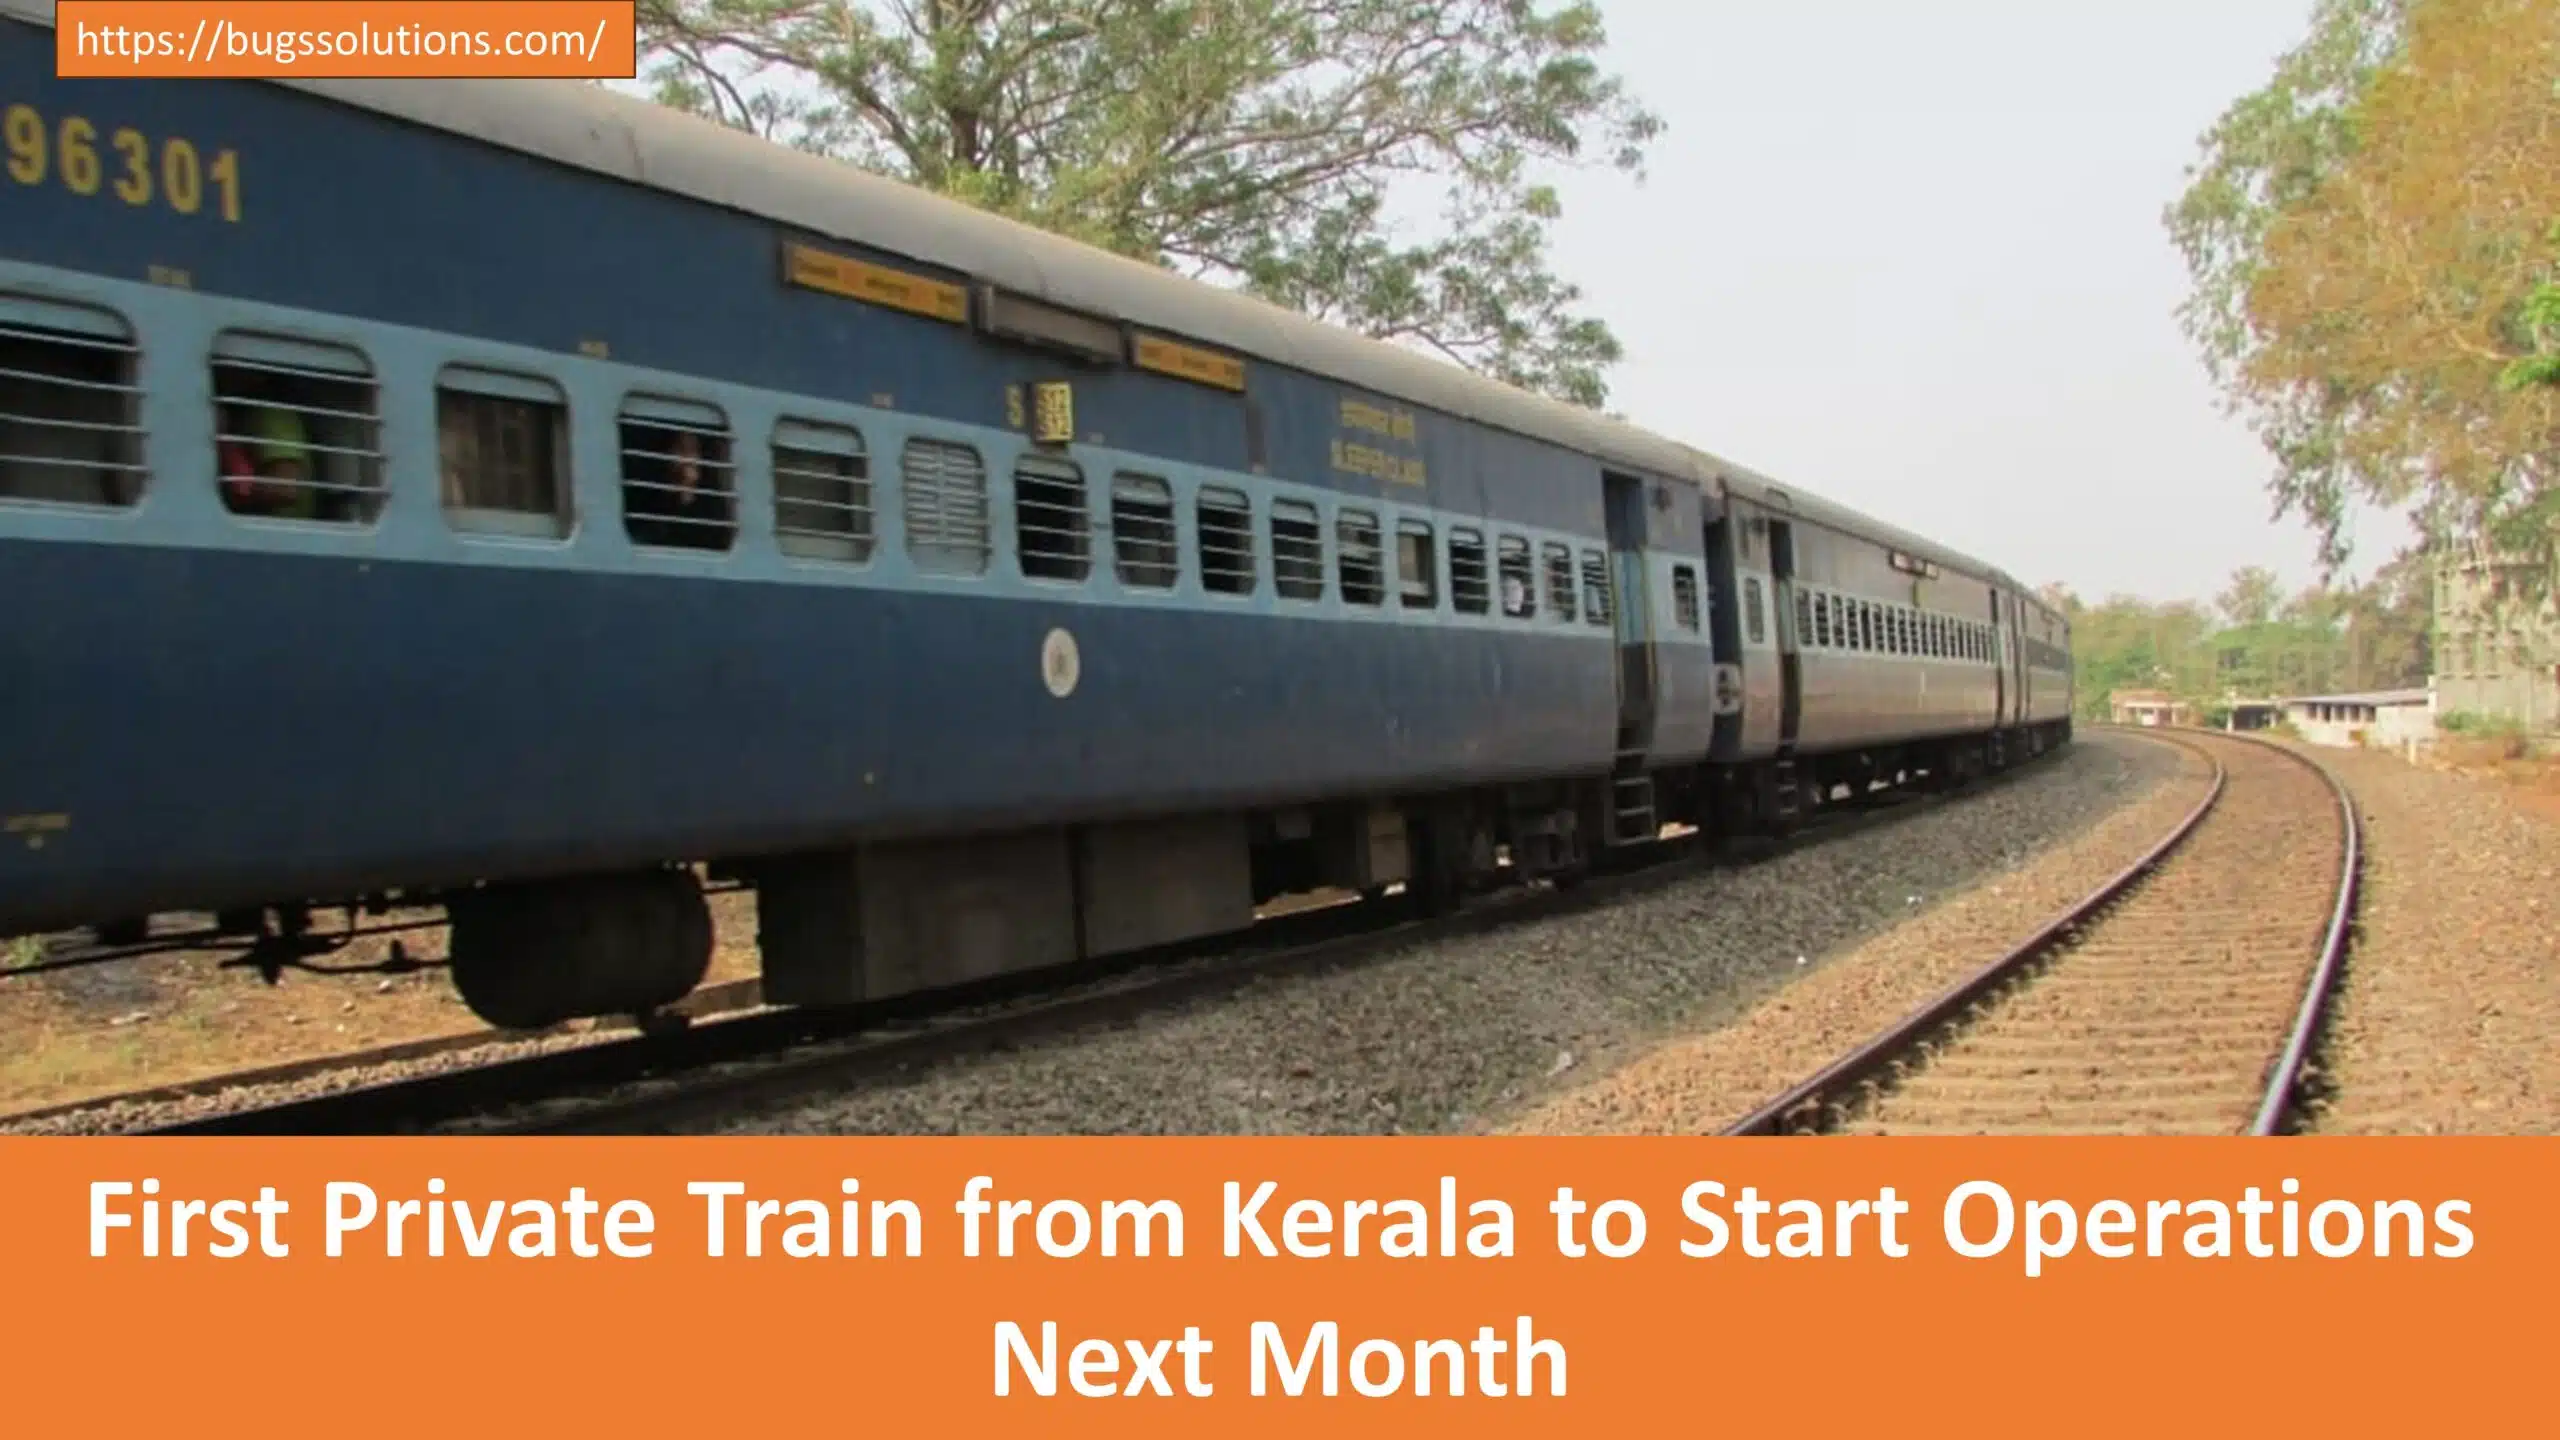 First Private Train from Kerala to Start Operations Next Month